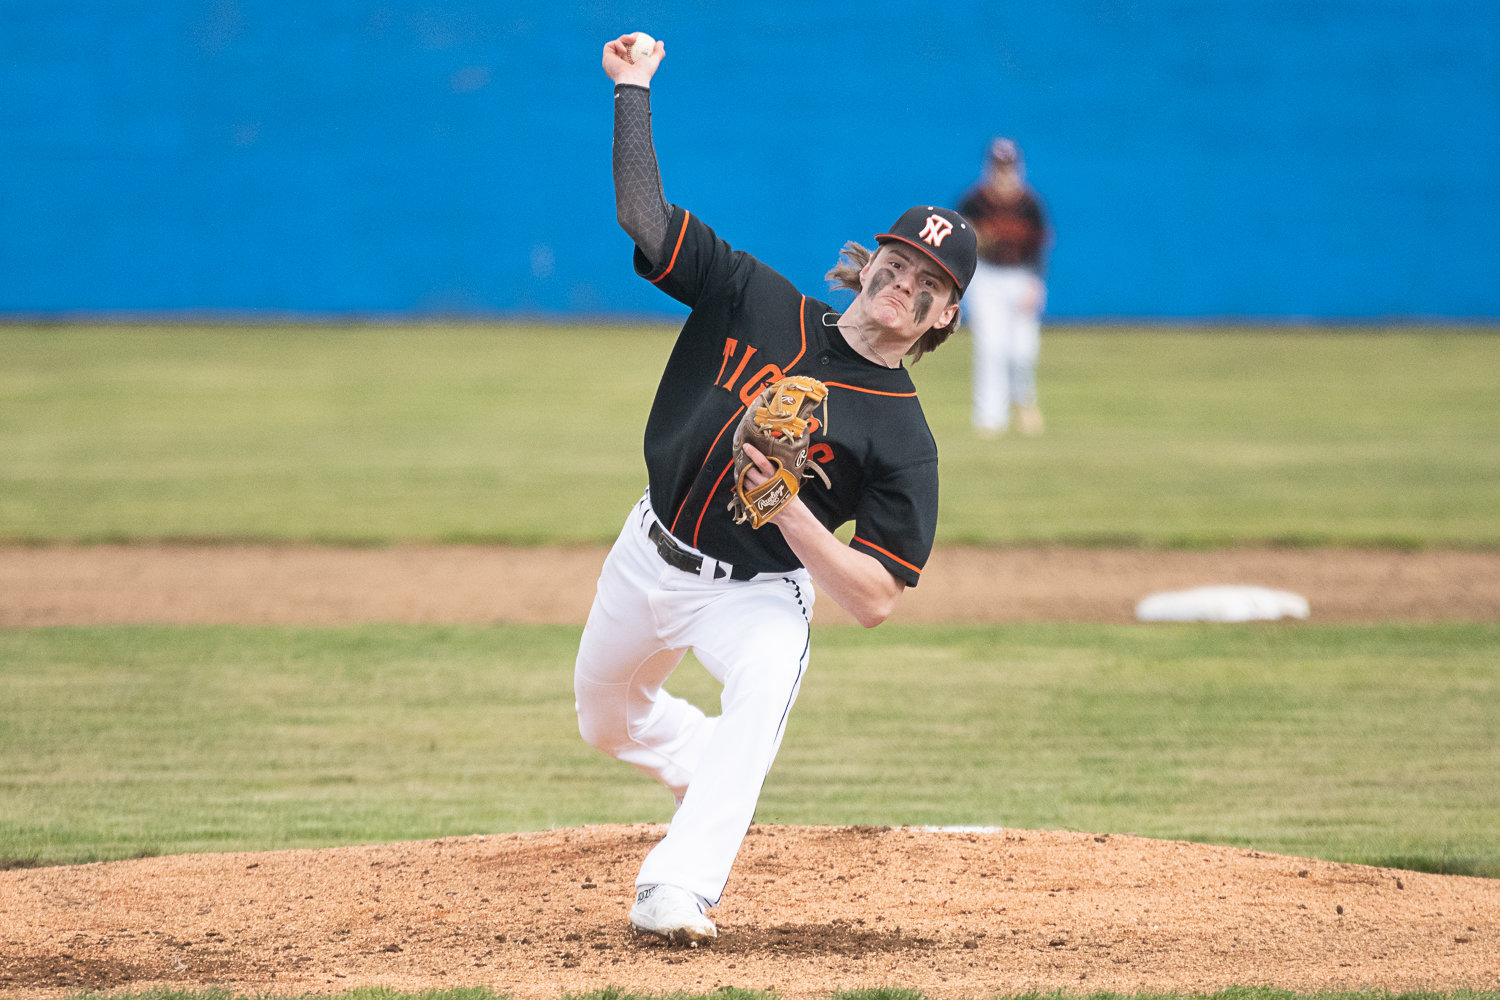 Conner Holmes throws a pitch during the bottom of the first inning of Napavine's 10-4 loss at Adna on March 15.